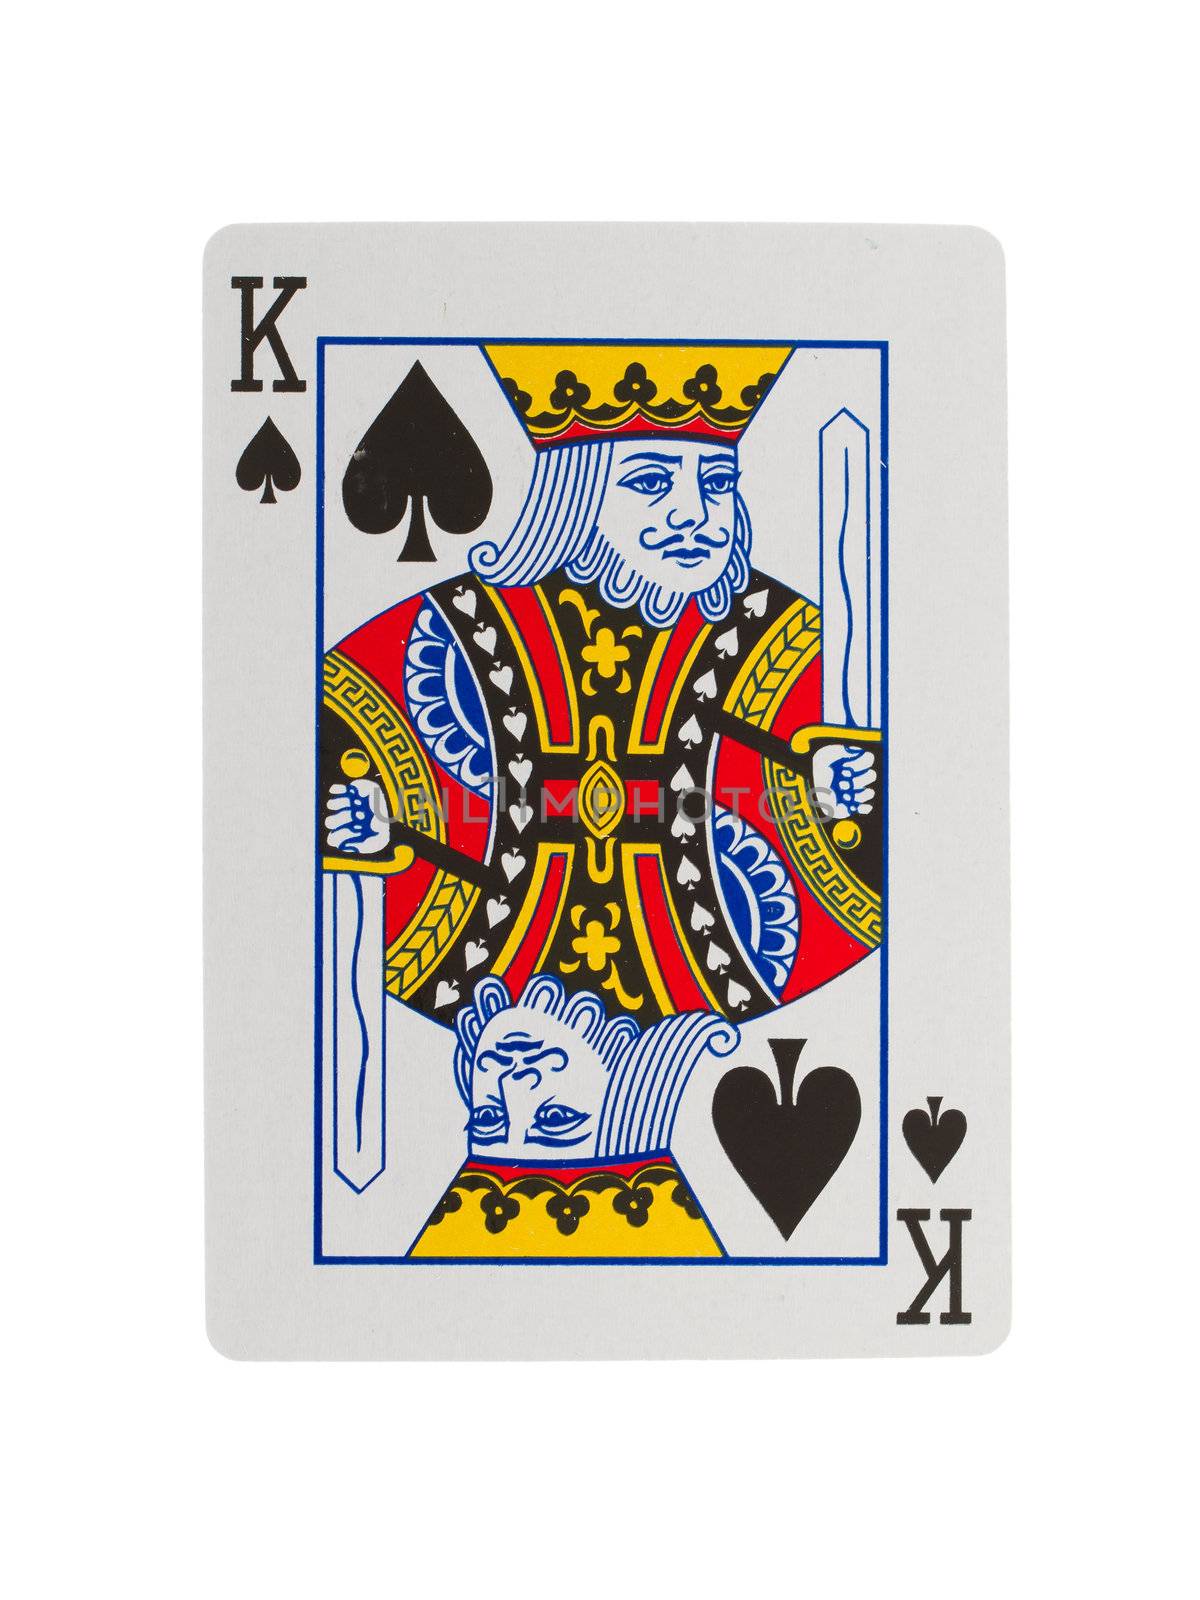 Old playing card (king) isolated on a white background